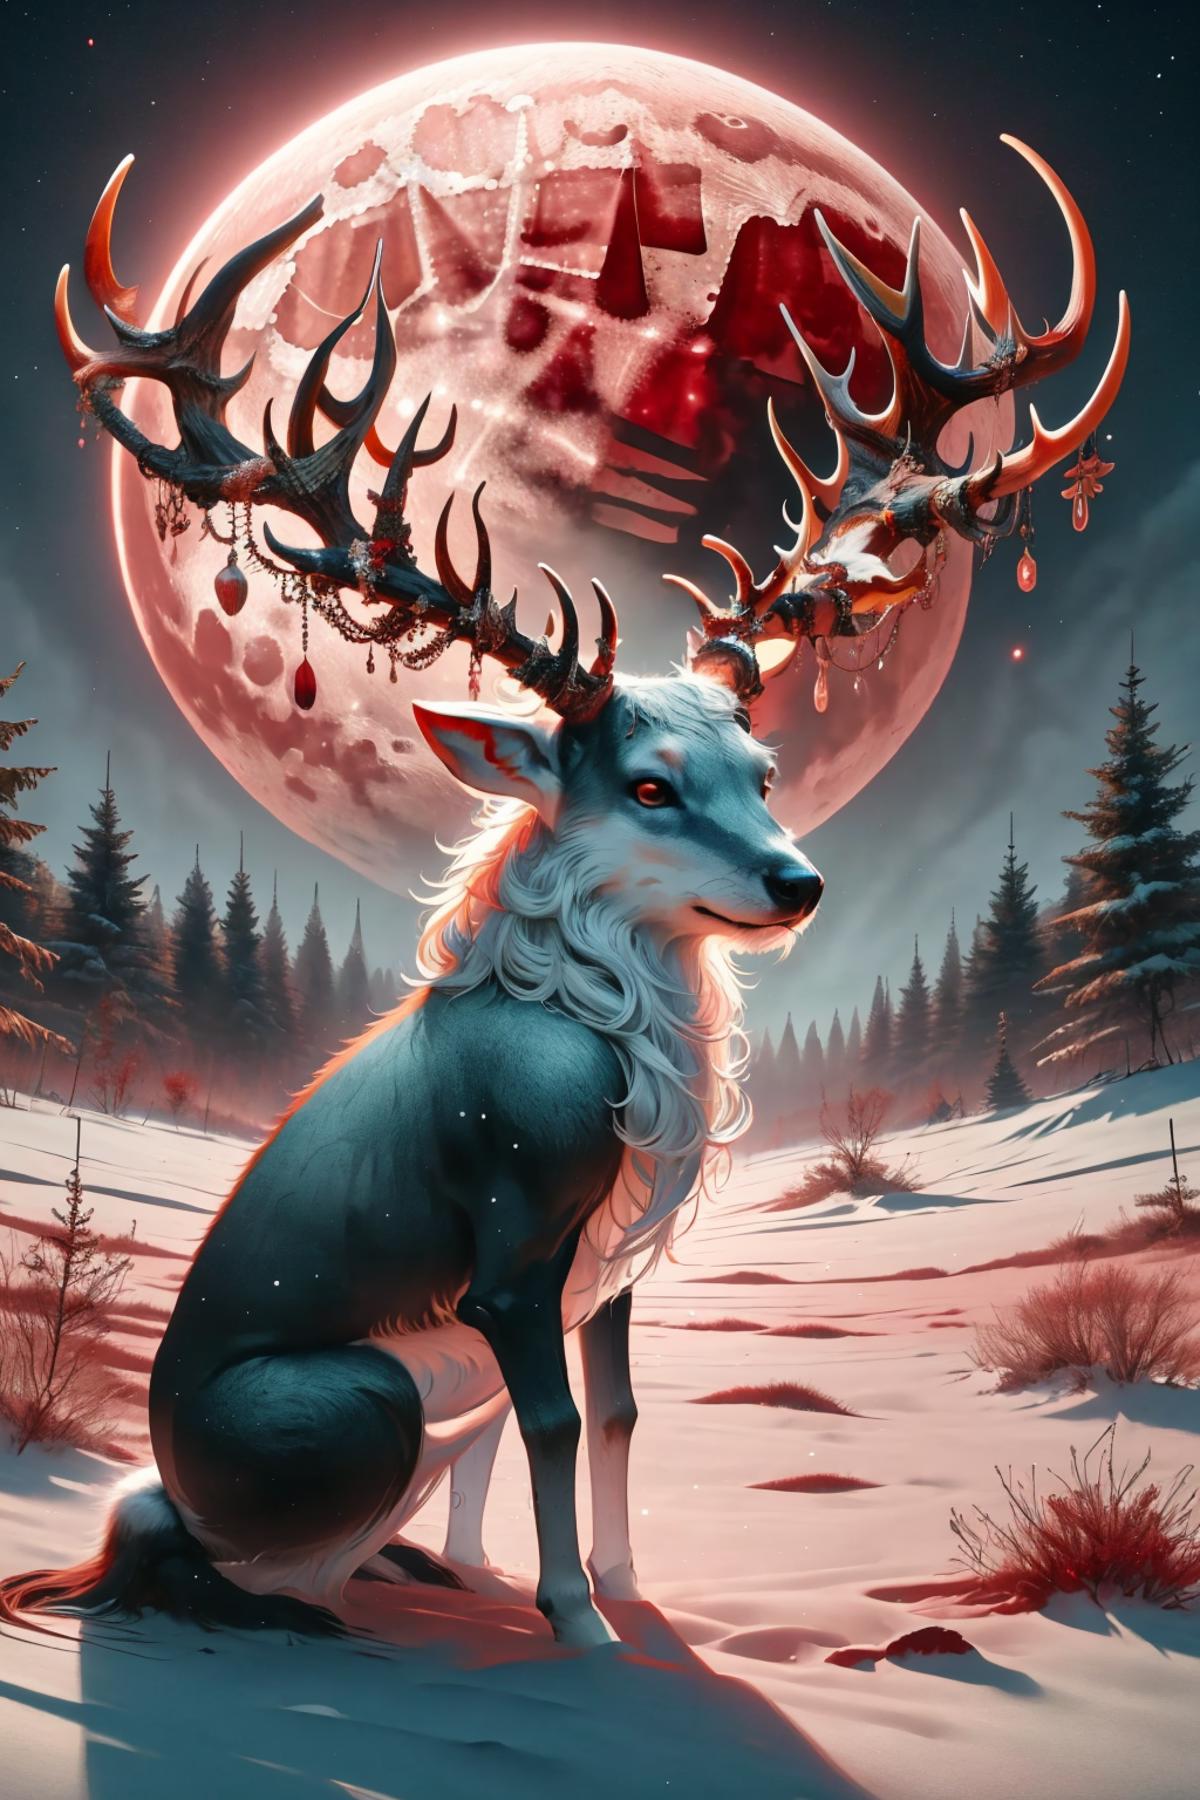 A fantasy illustration of a deer-like creature with antlers, sitting in the snow.